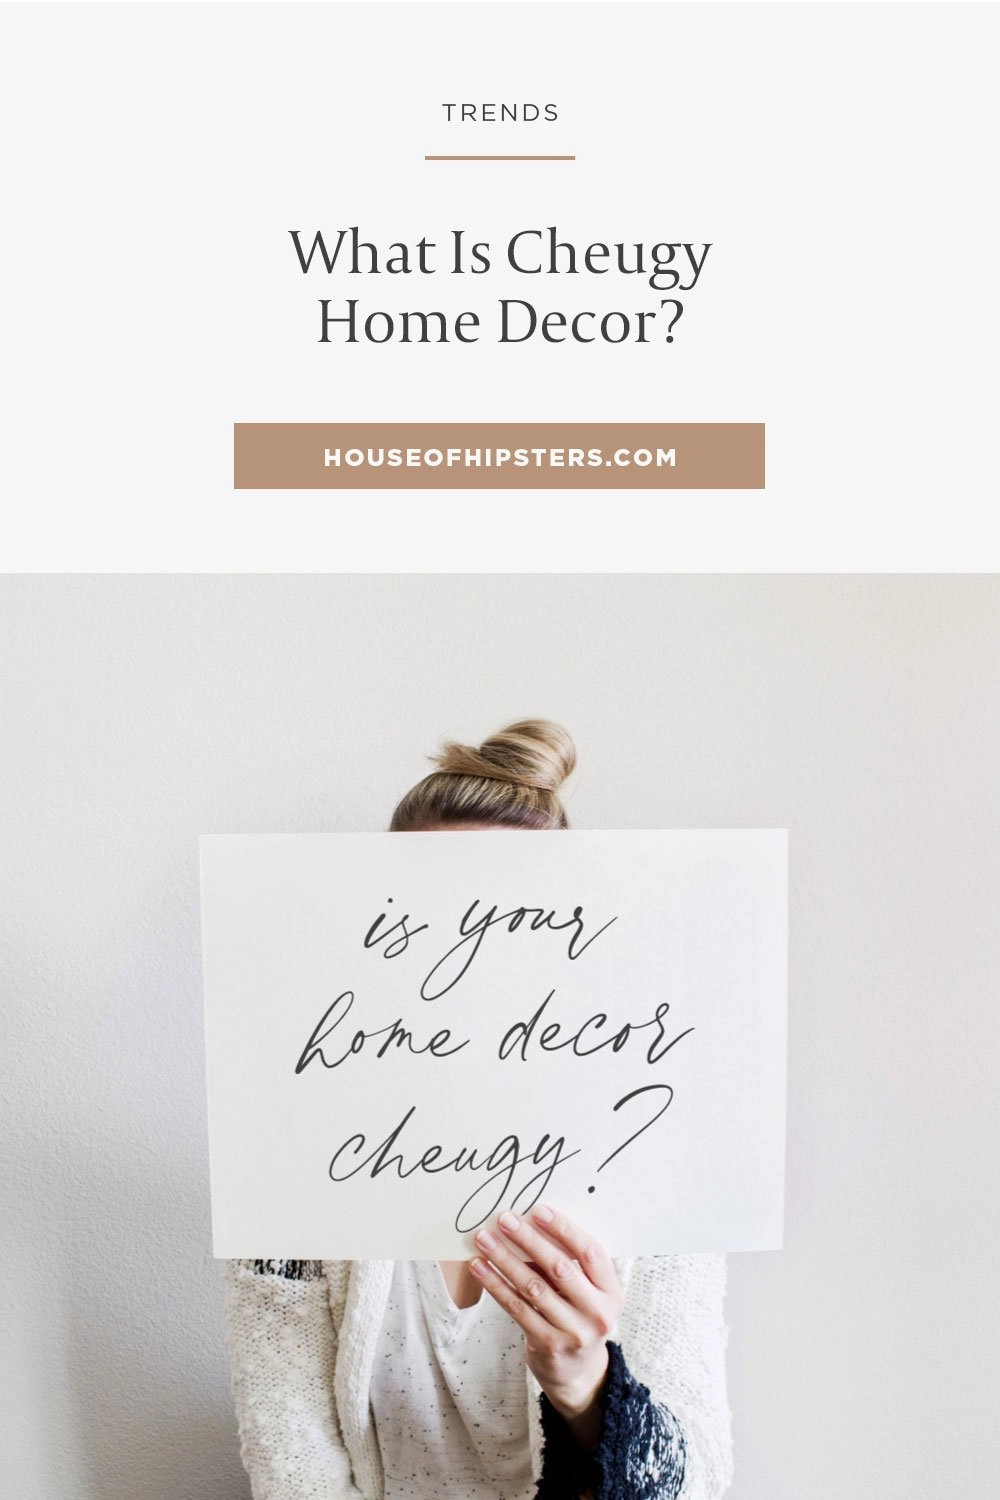 What is Cheugy Home Decor?